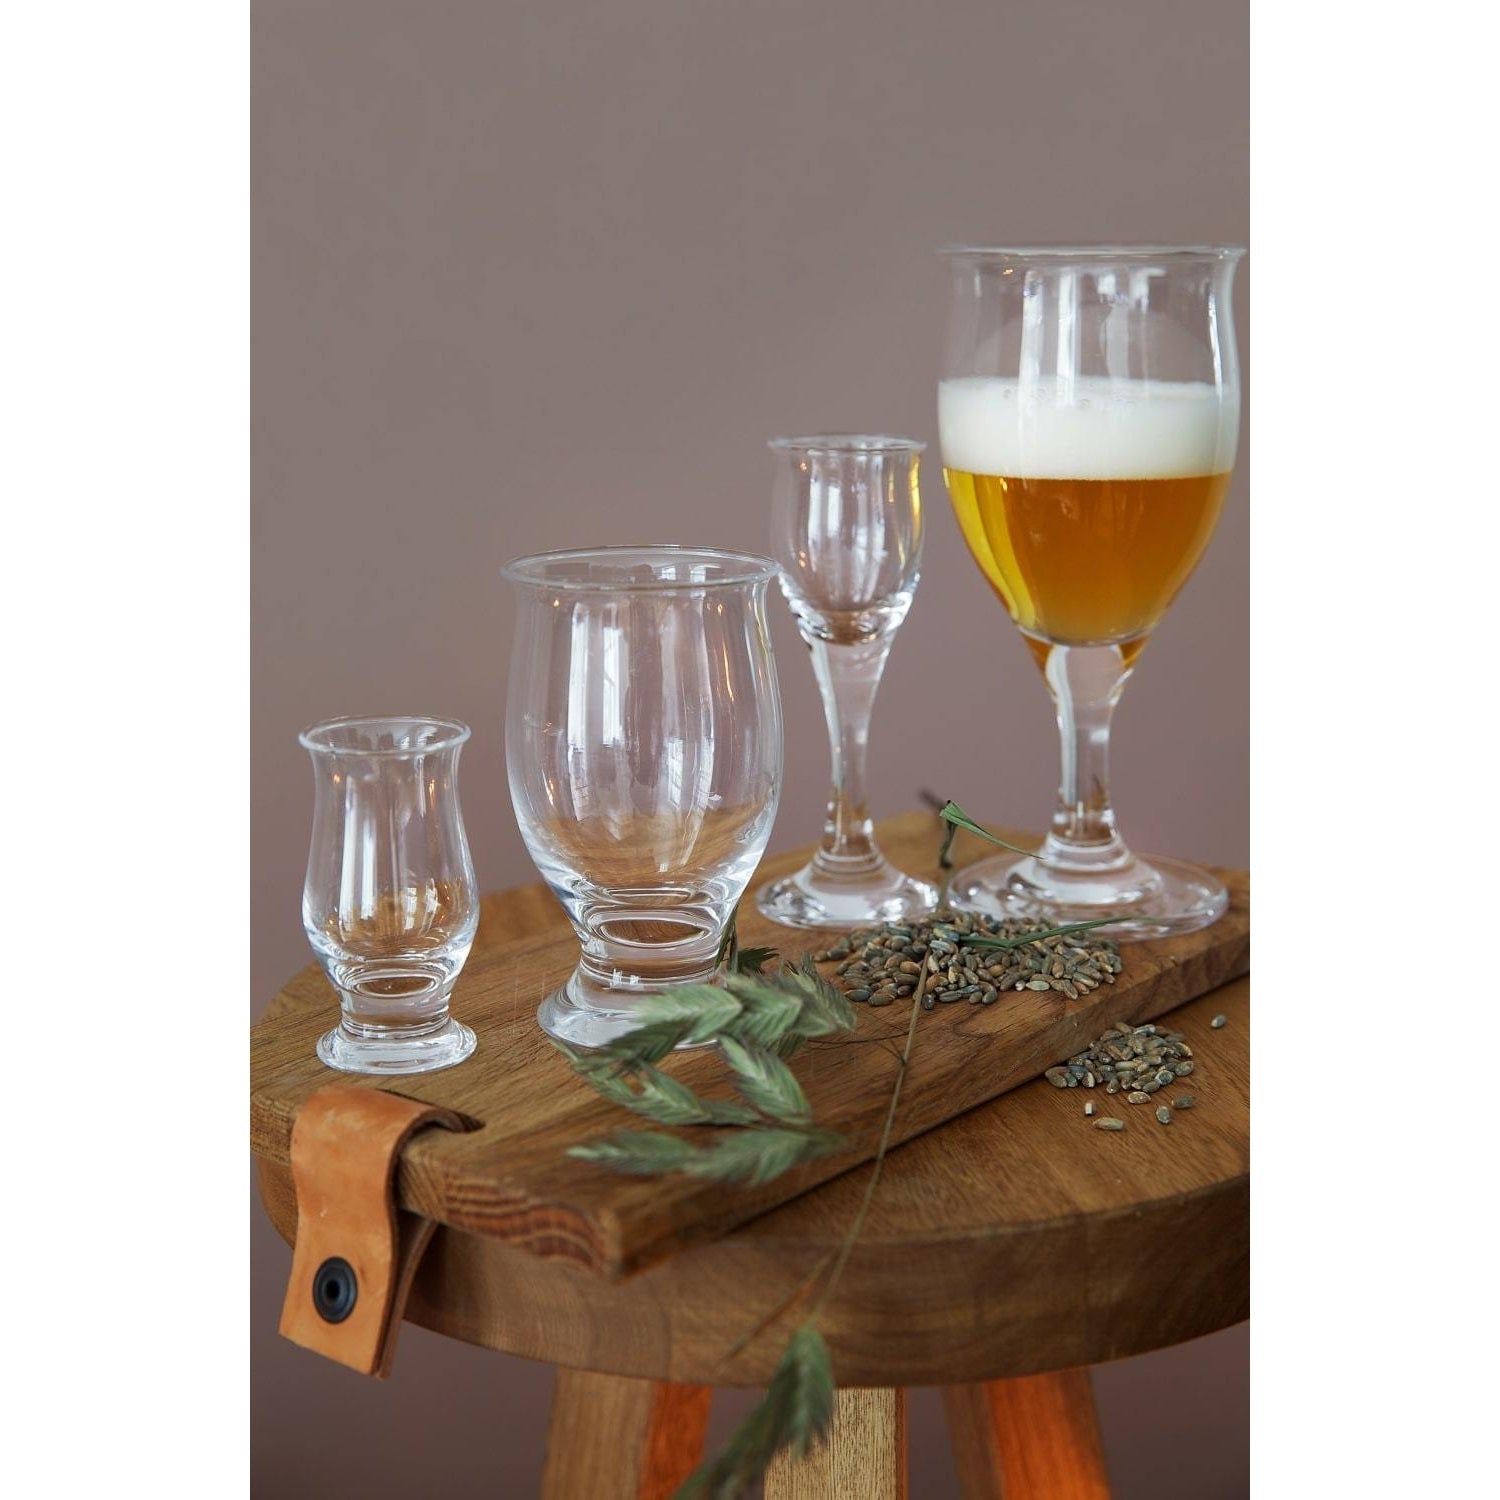 Holmegaard Idéelle Beer Glass In Style